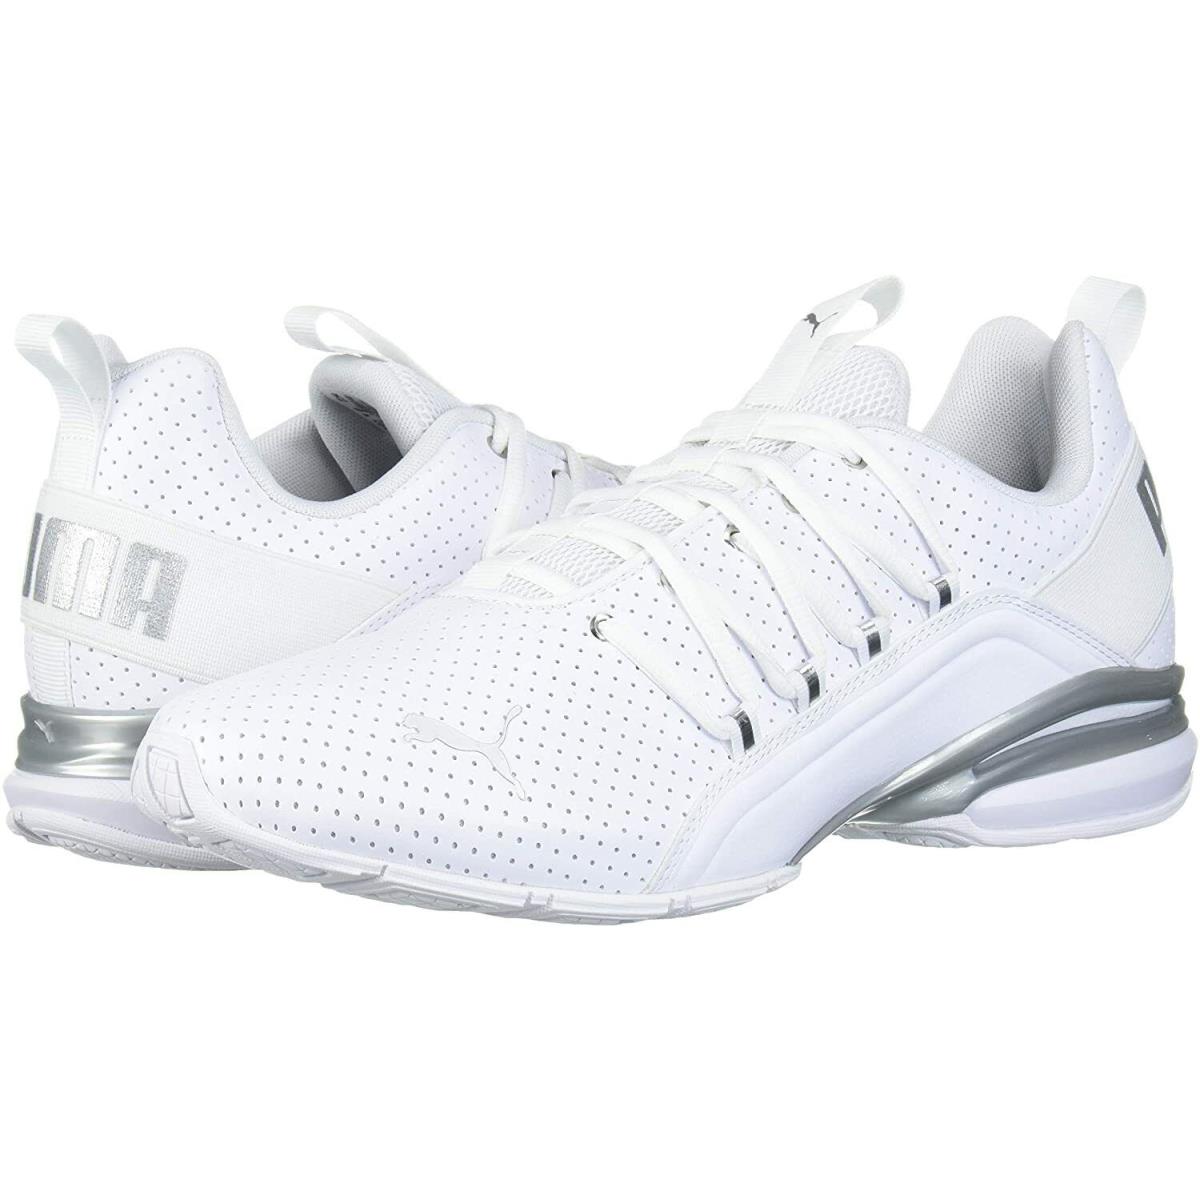 Men`s Shoes Puma Axelion Perf Athletic Training Sneakers 19355501 White / Silver